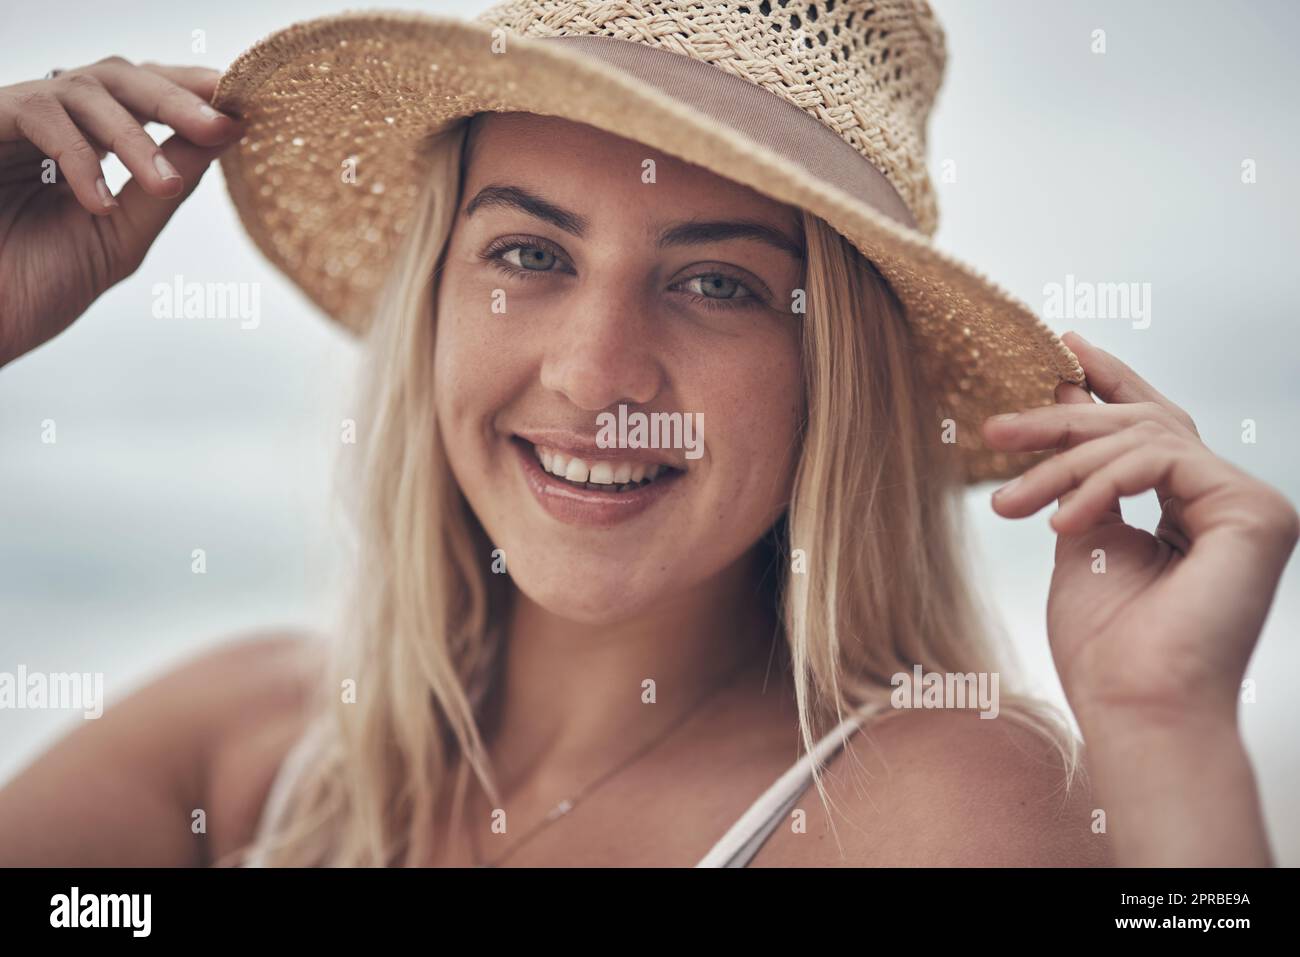 A good hat puts me in a good mood. a beautiful young woman spending the day at the beach. Stock Photo